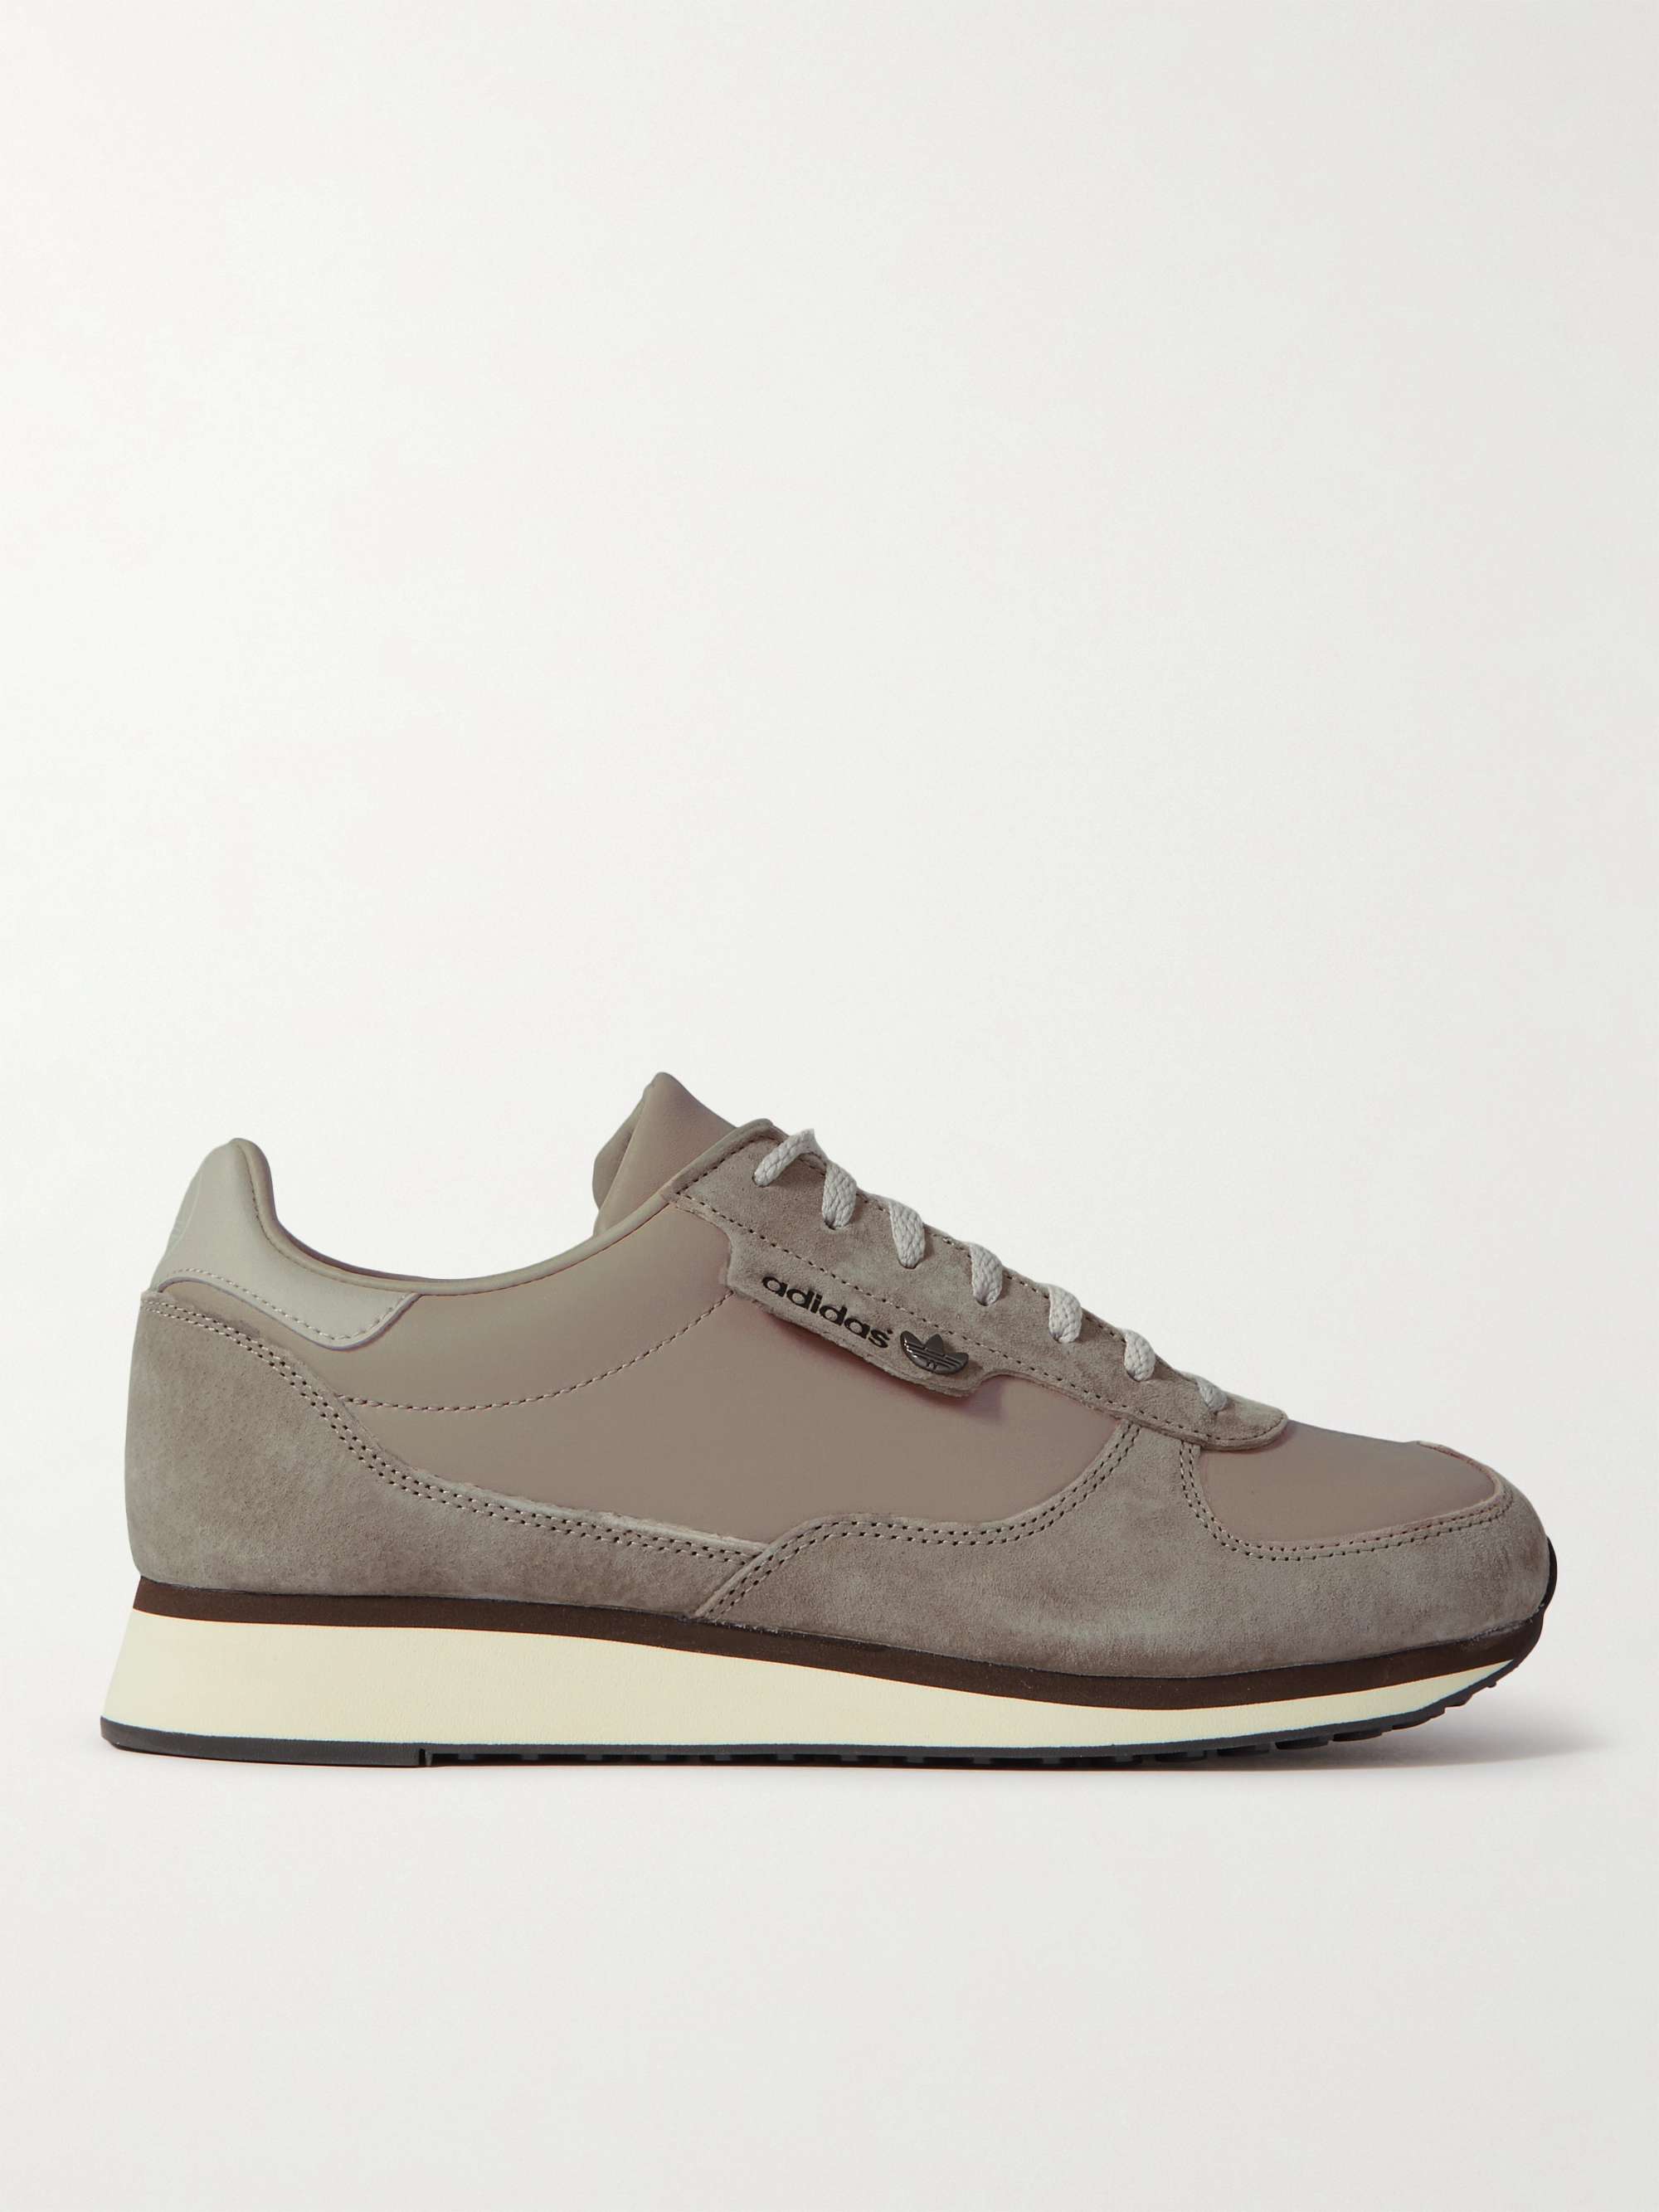 ADIDAS CONSORTIUM Lawkholme SPZL Leather and Suede Sneakers for Men ...